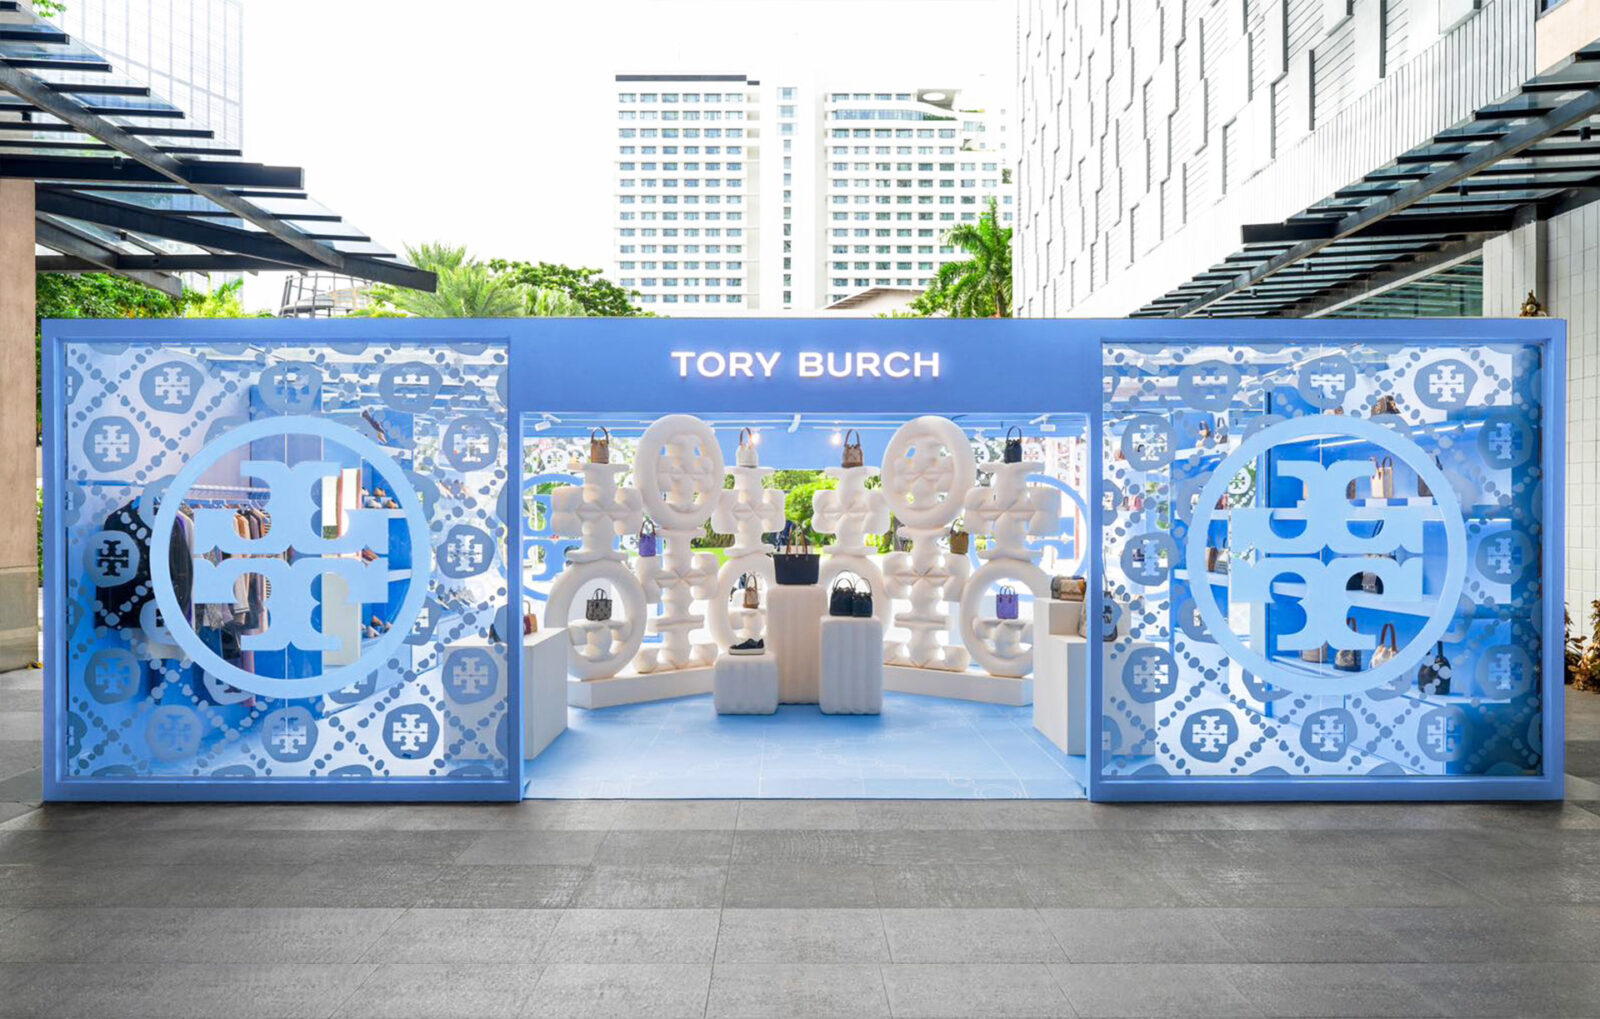 The pop-up store adorned in blue wall paint and fluffy cloud-like Tory Burch monogram